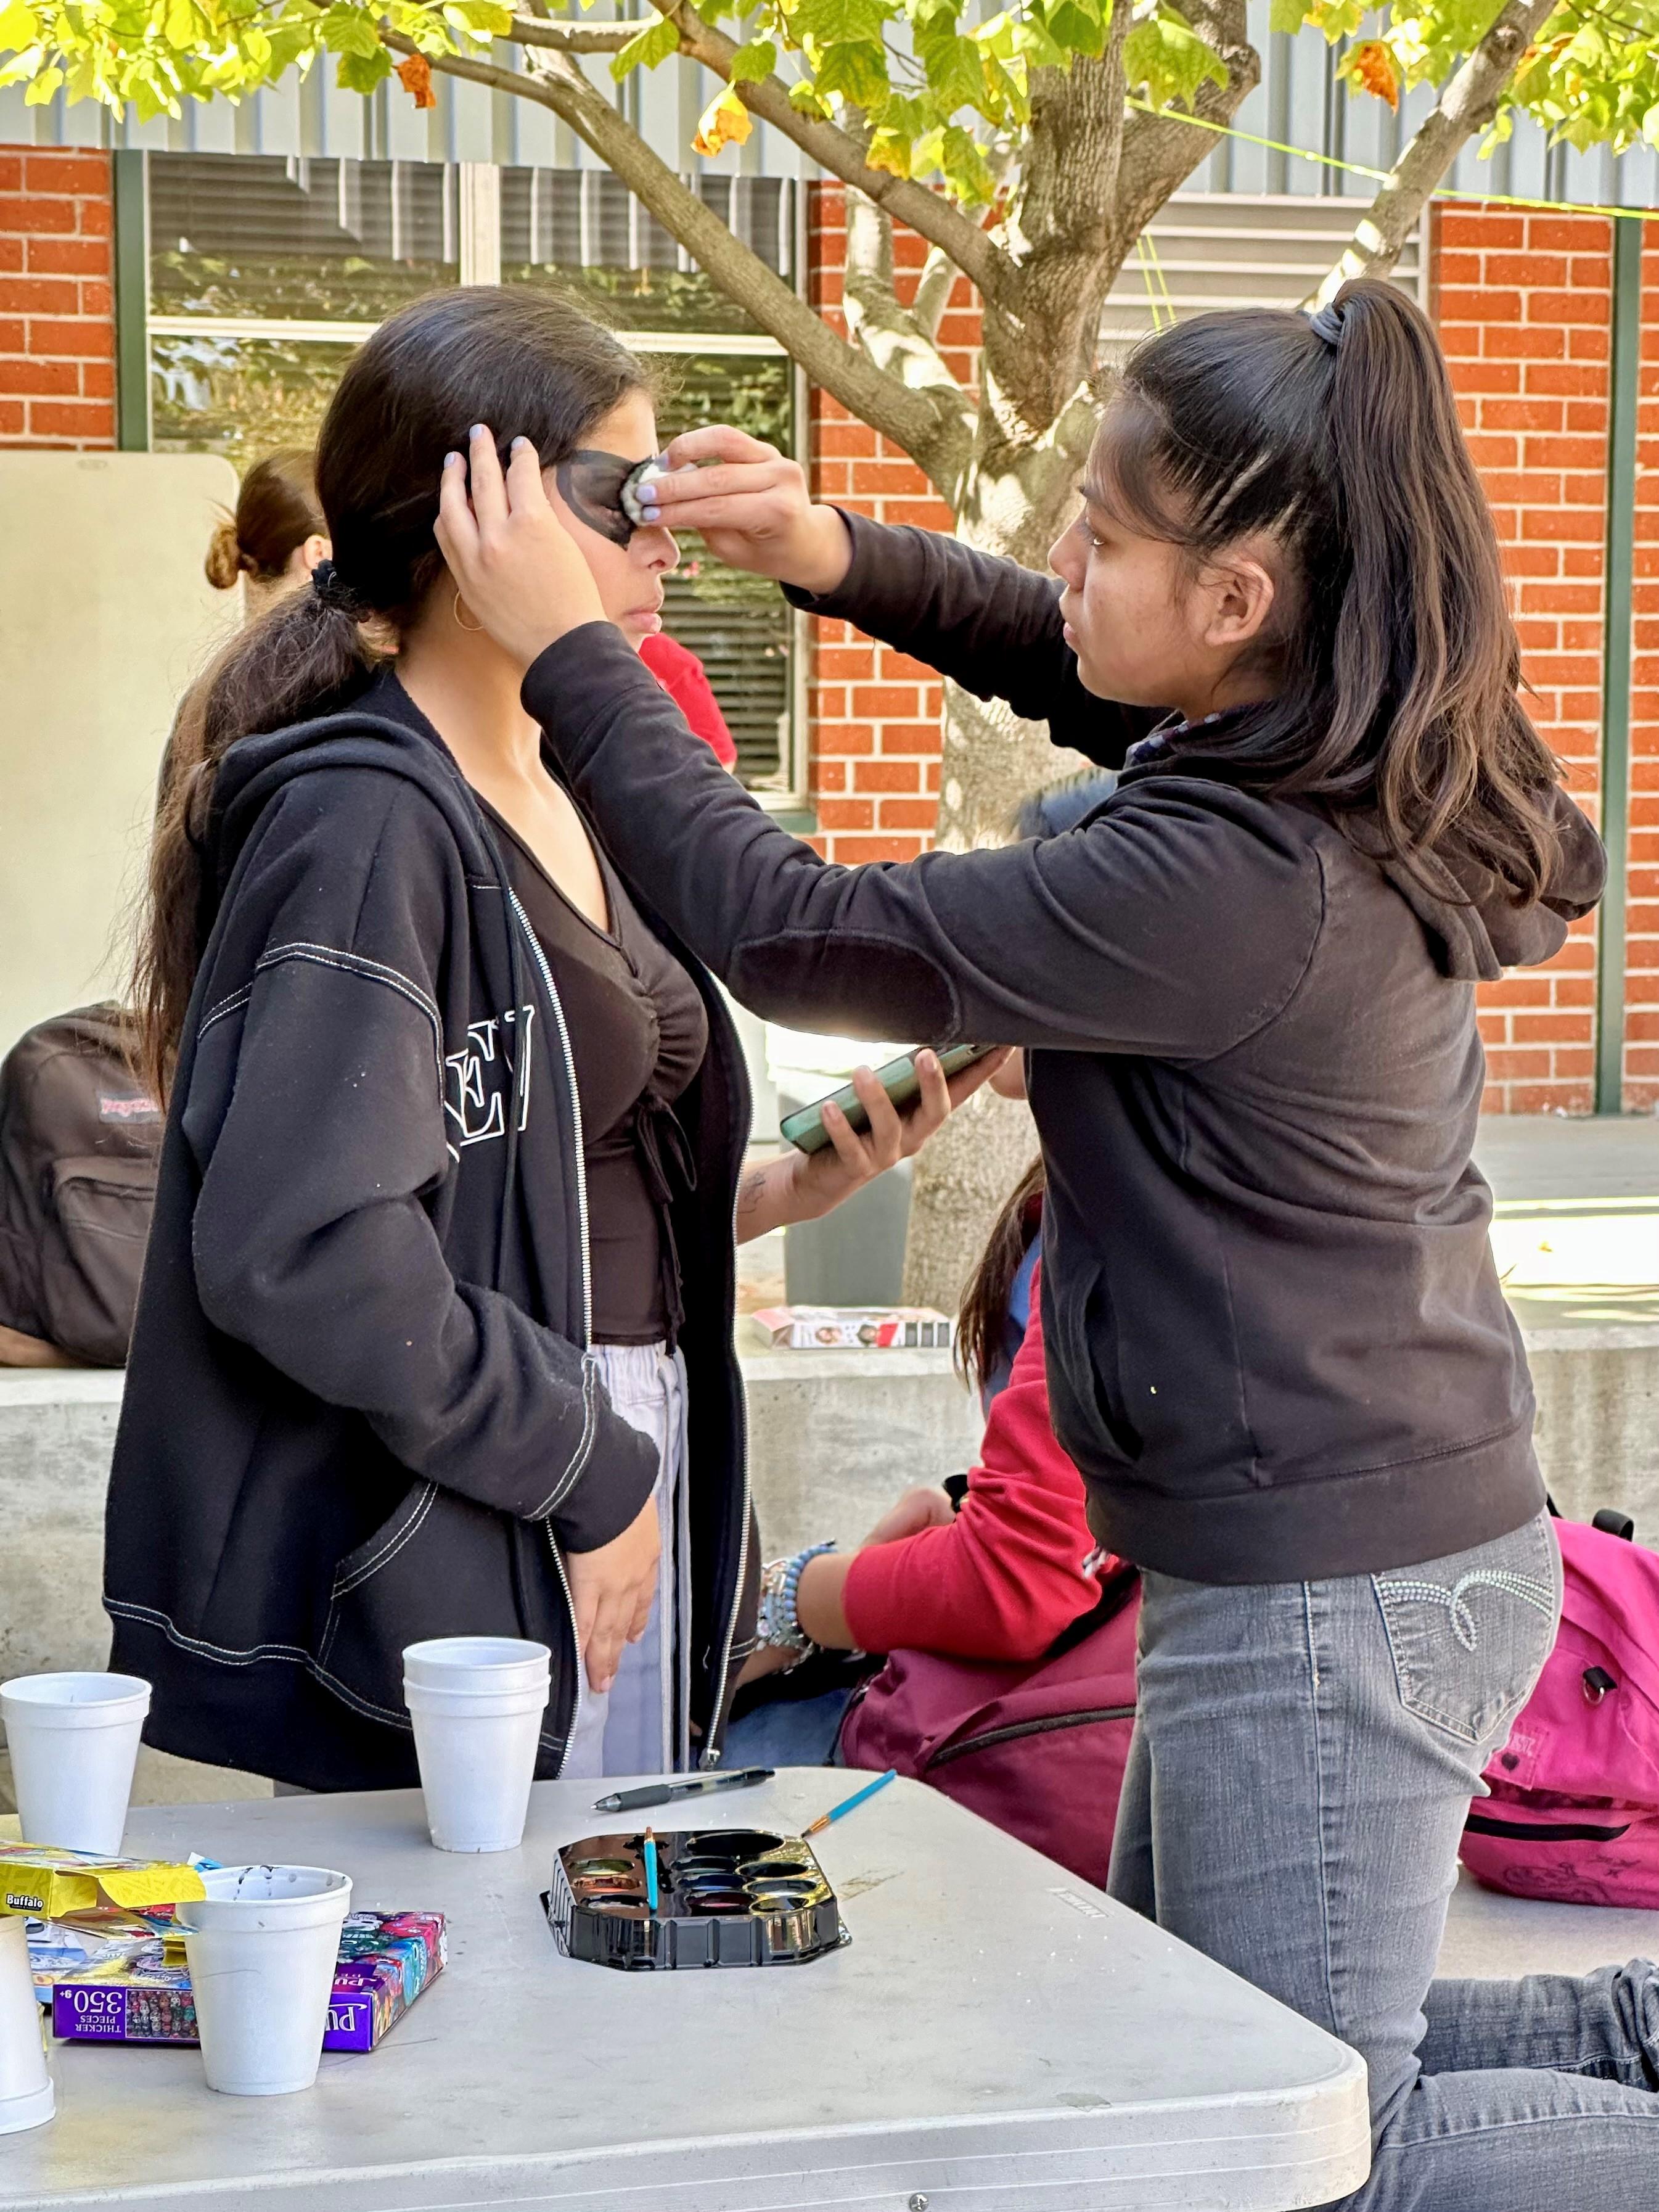 Students at Fremont face paint traditional mexican patterns to celebrate holiday